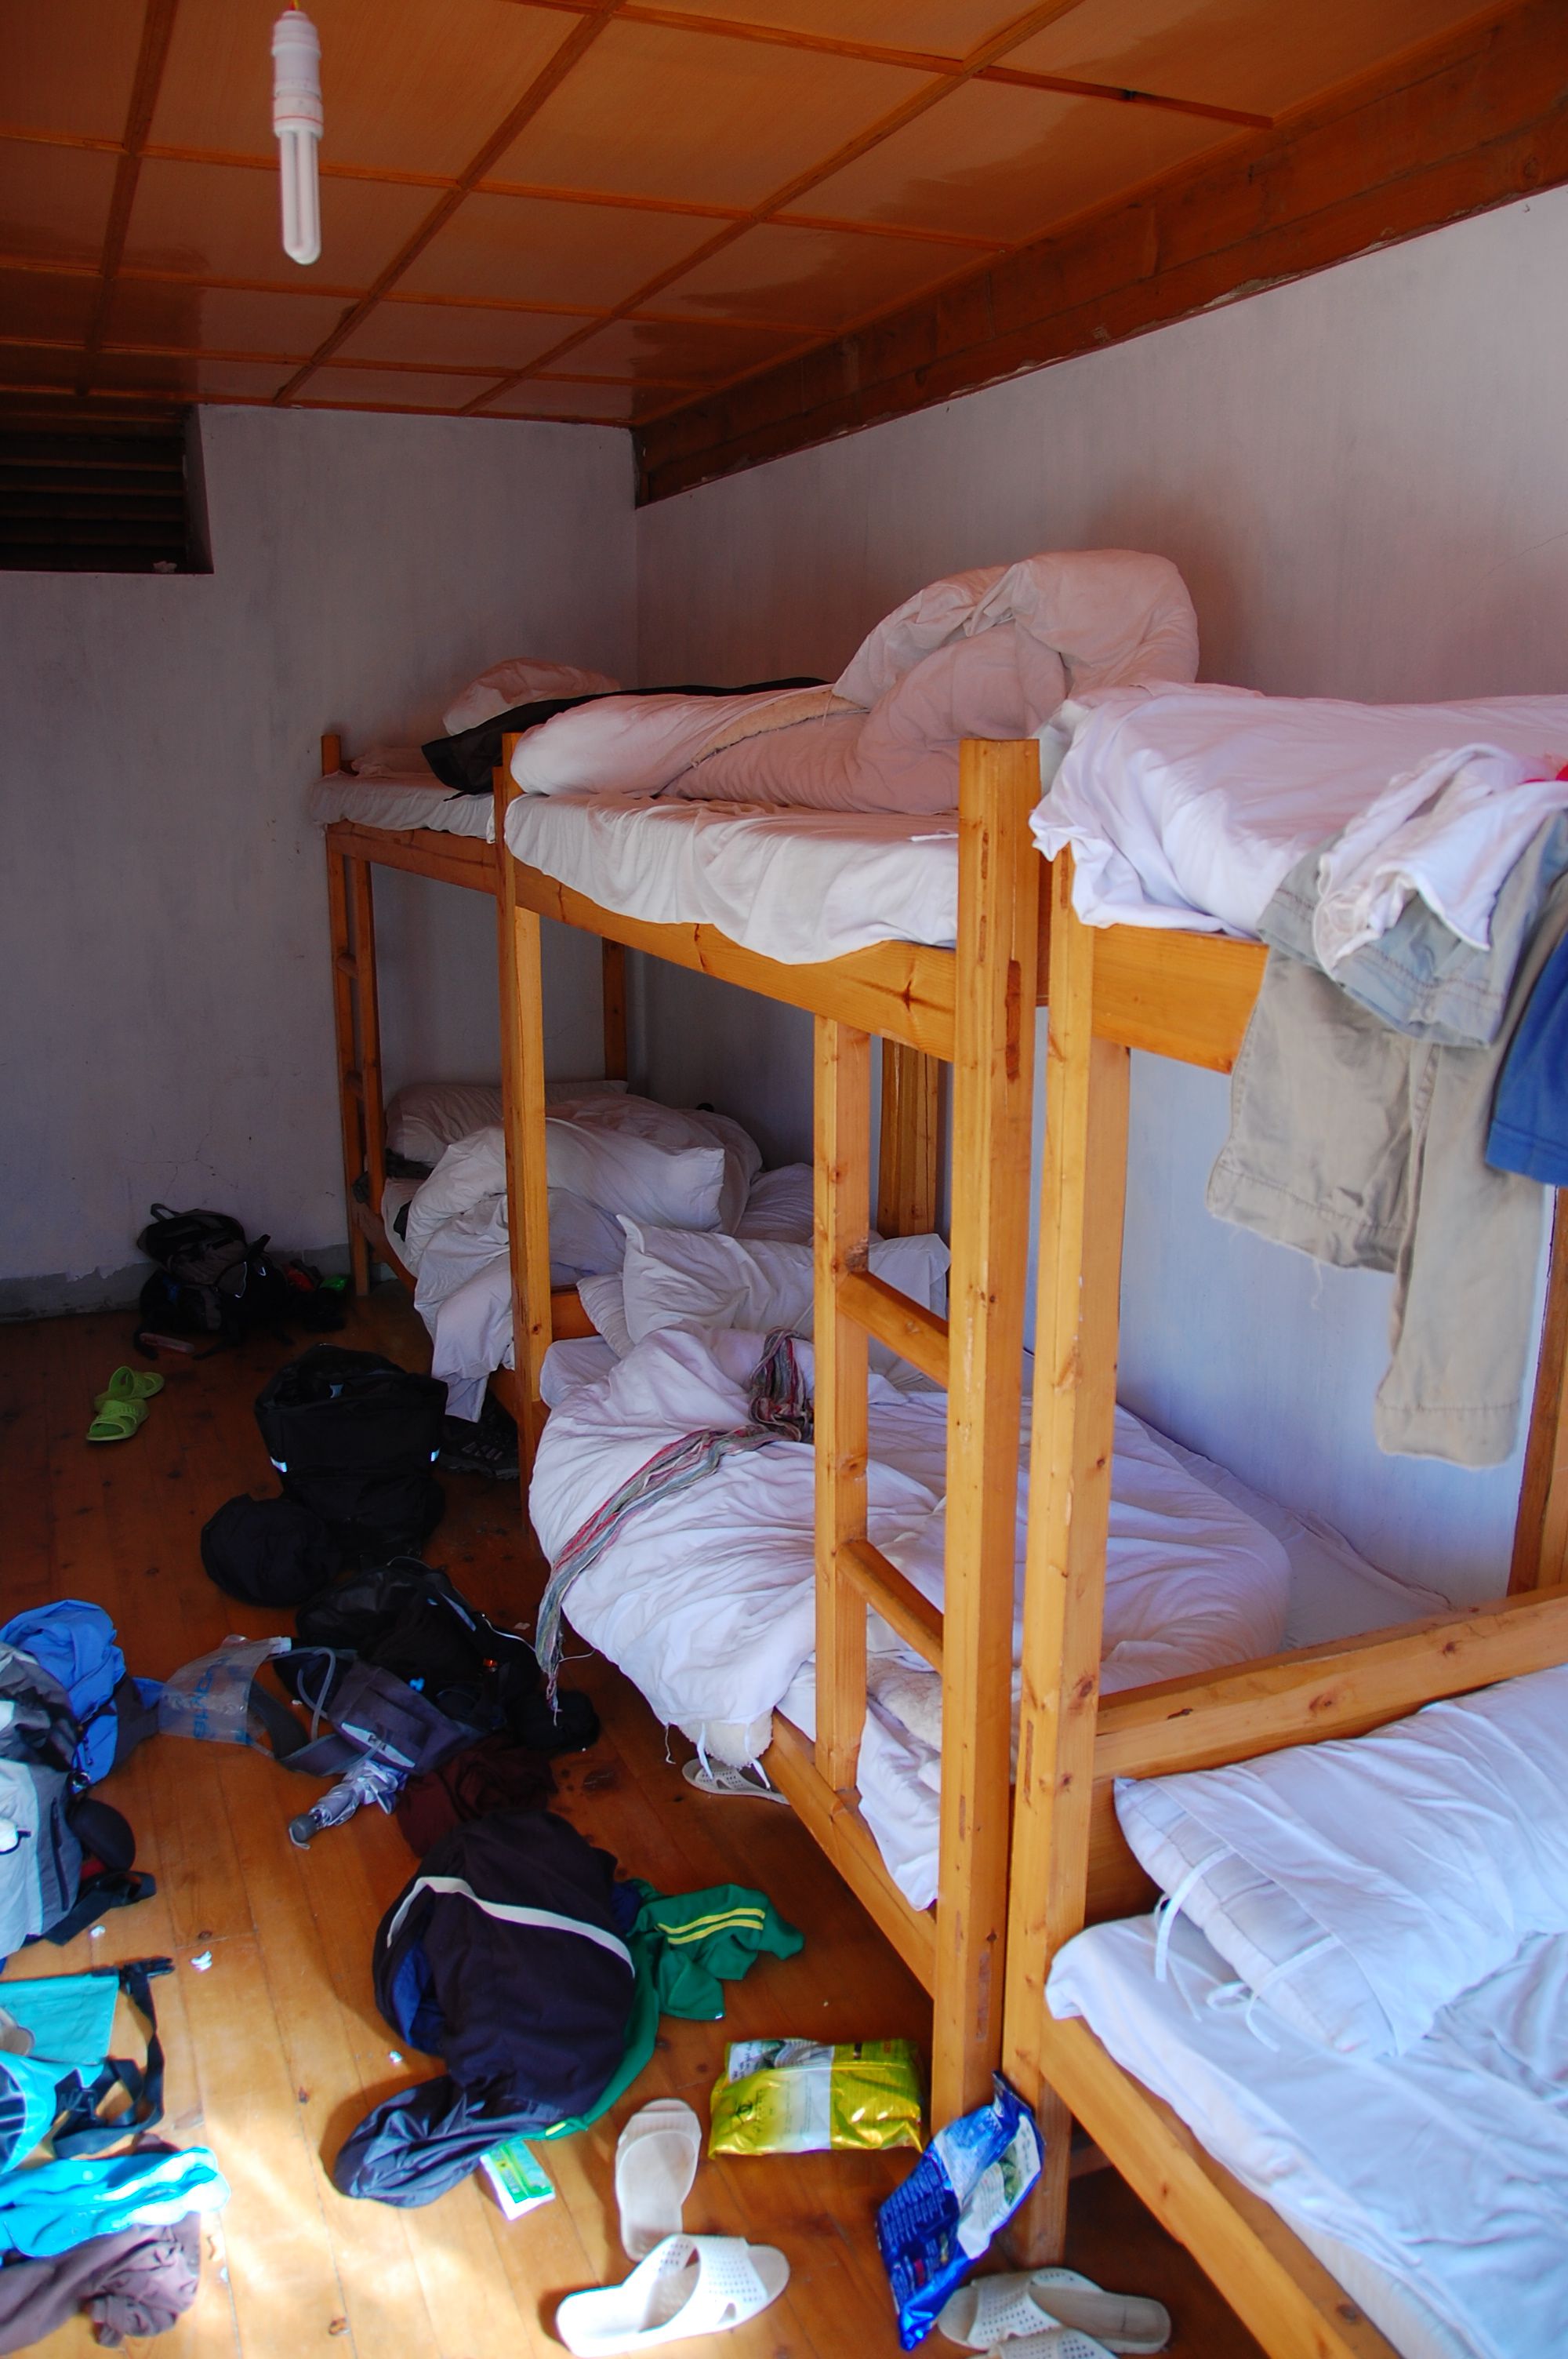 Hostel or Hotel? 7 Reasons to Stay in a Hostel